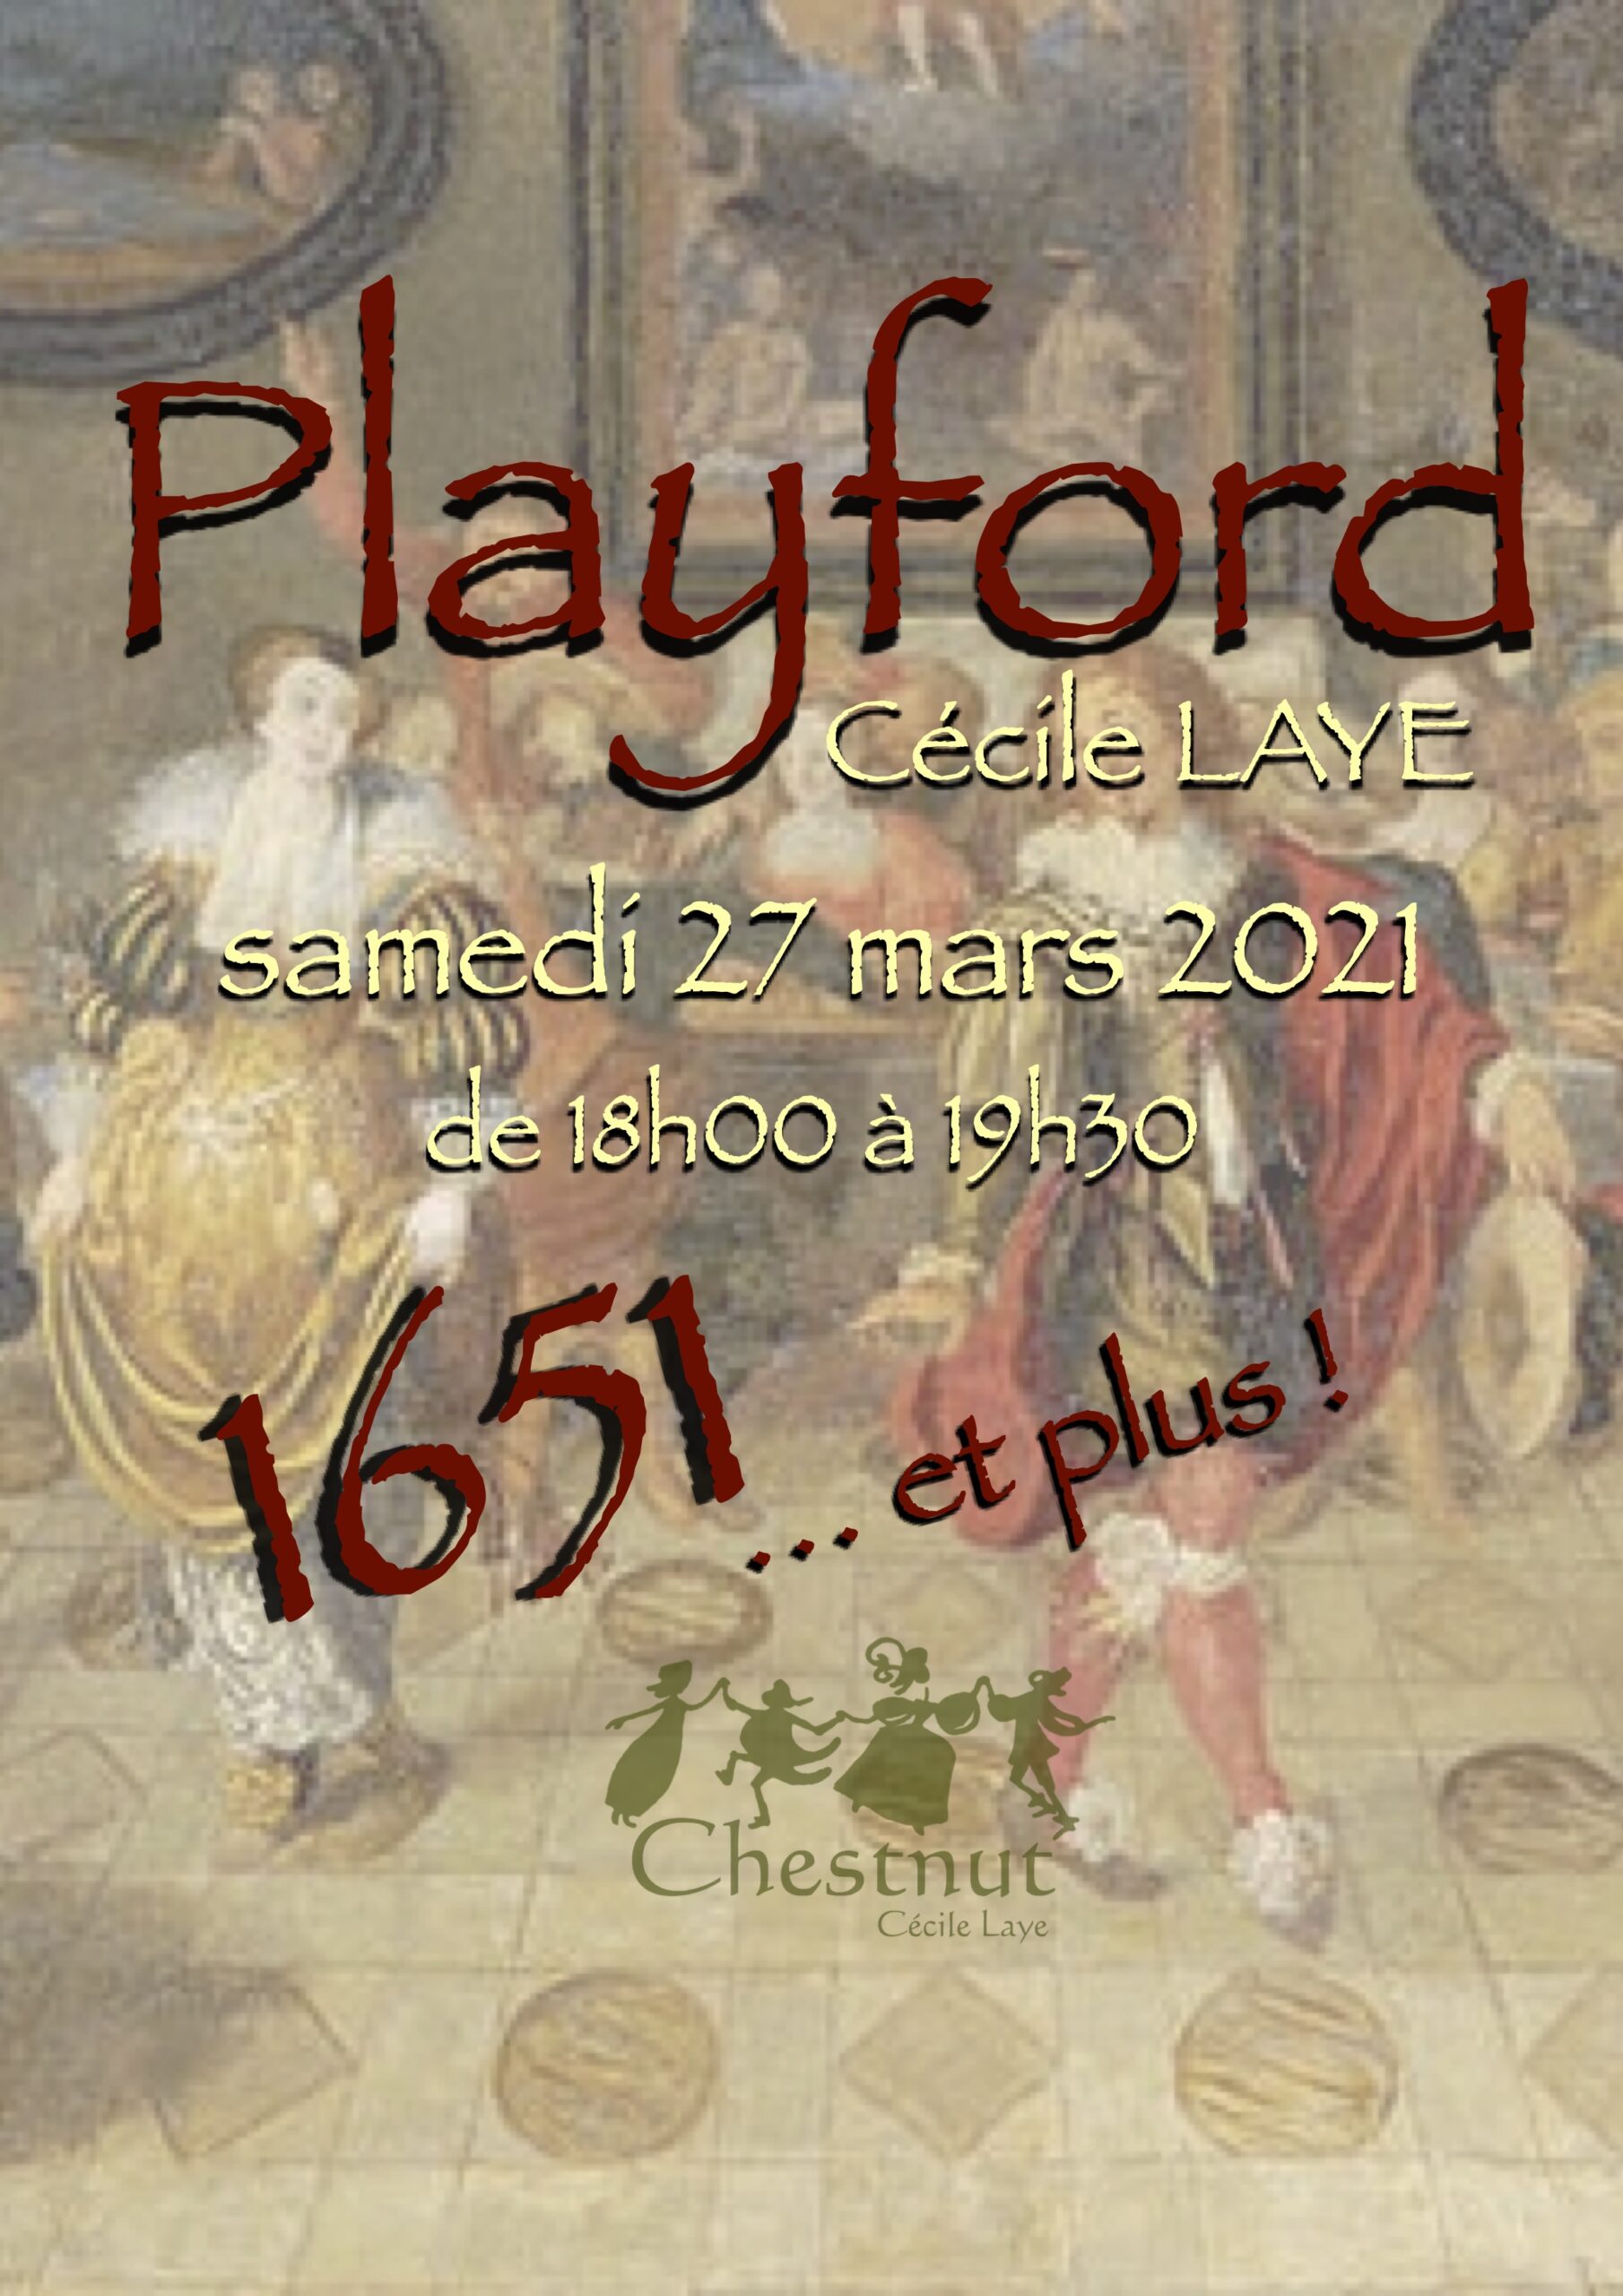 Online lecture / Playford 1651 ... and more ! (2/3)